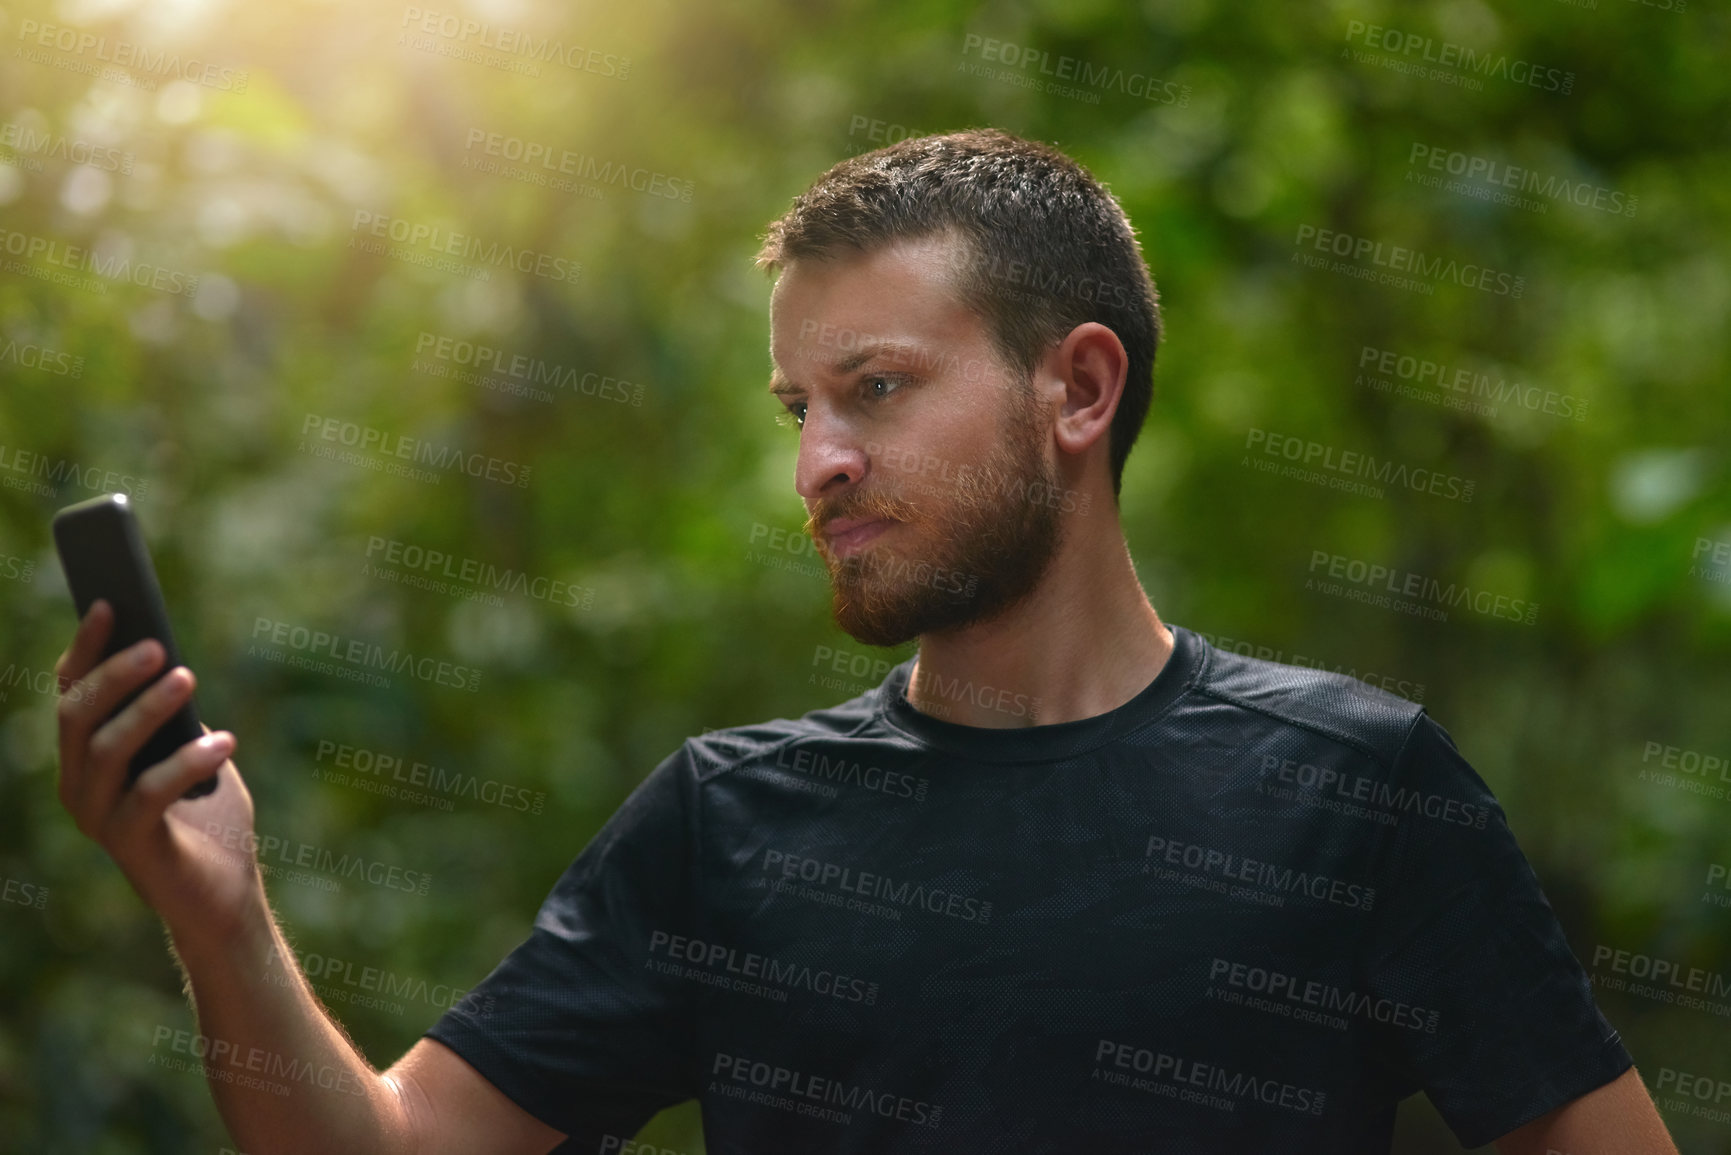 Buy stock photo Shot of a young man using his cellphone while standing alone in a jungle